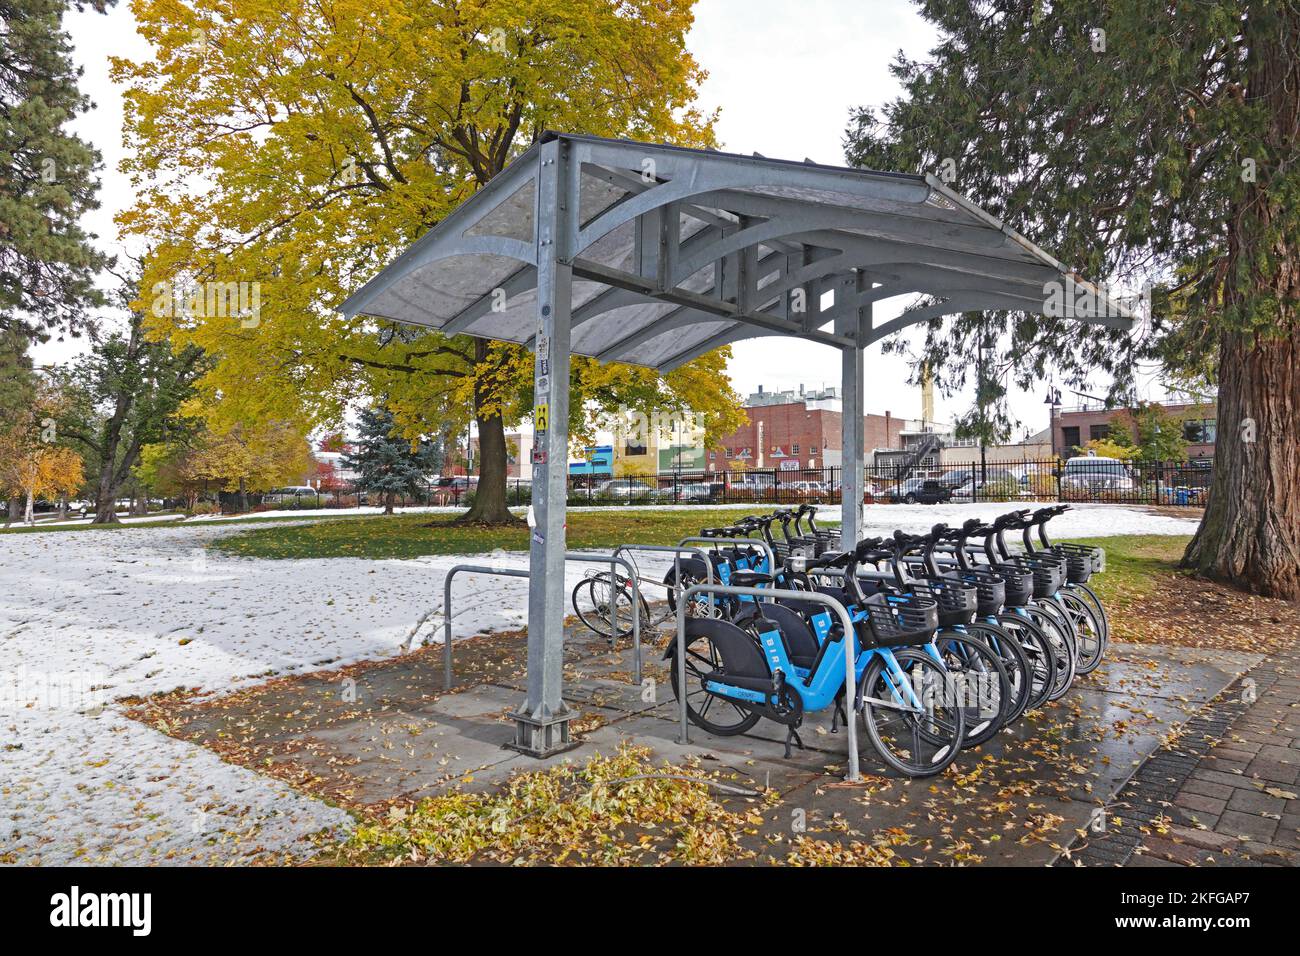 A rack of electric rental bikes in the downtown area of Bend, Oregon. The bikes have become very popular with both visitors and locals. Stock Photo